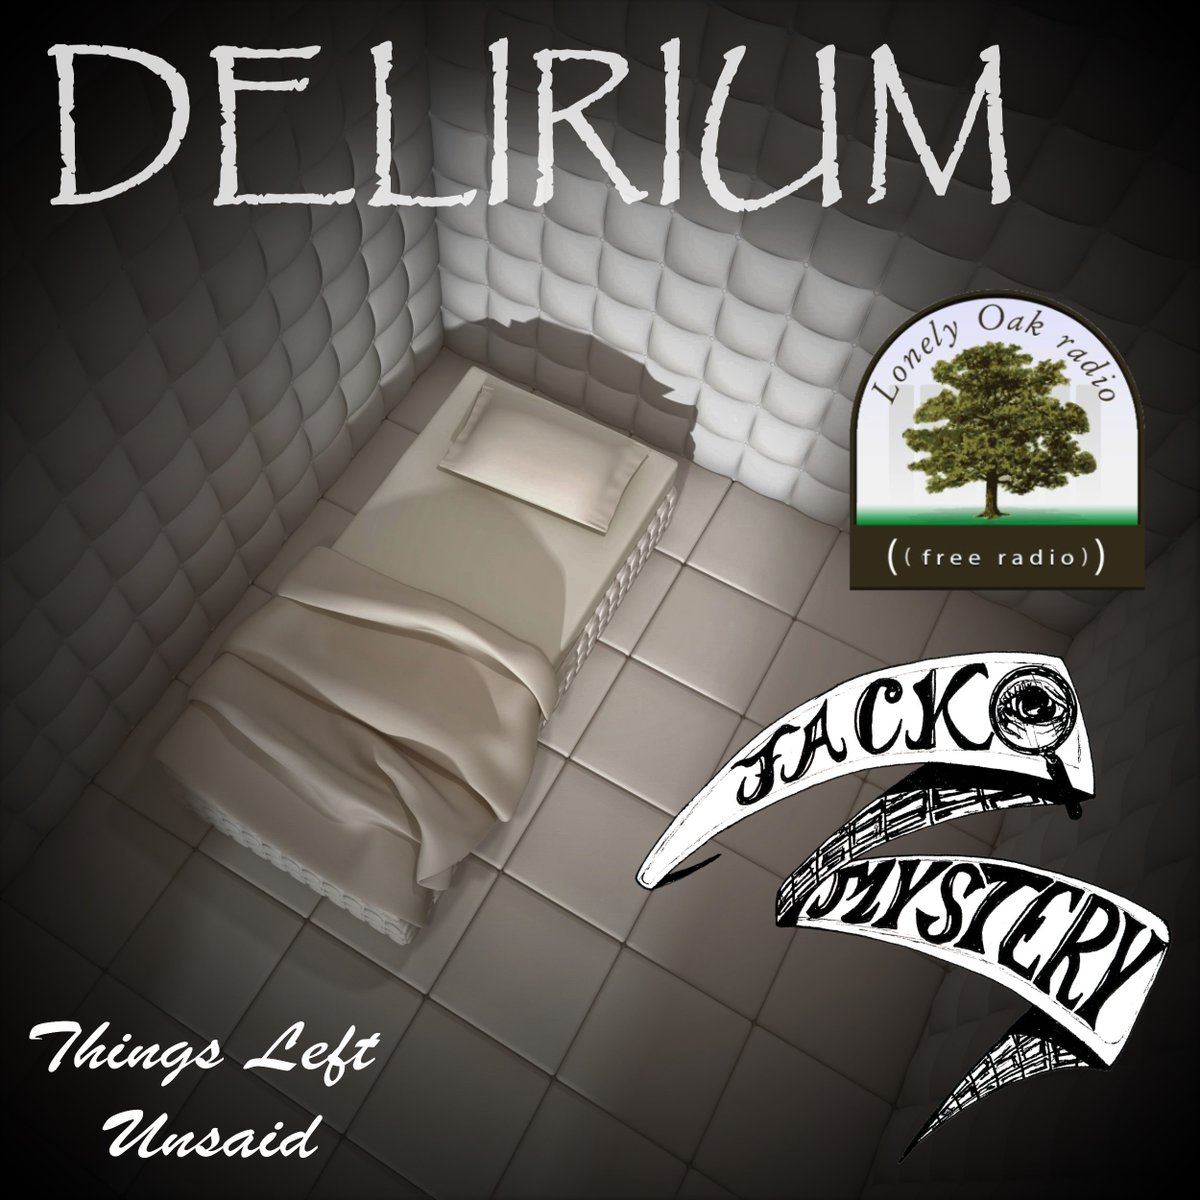 On Tuesday, January 16  at 3:27 AM, and at 3:27 PM (Pacific Time) we play 'Delirium ' by Jack Mystery @JackMystery817 Come and listen at Lonelyoakradio.com / %23OpenVault Collection show, @LonelyOakradio